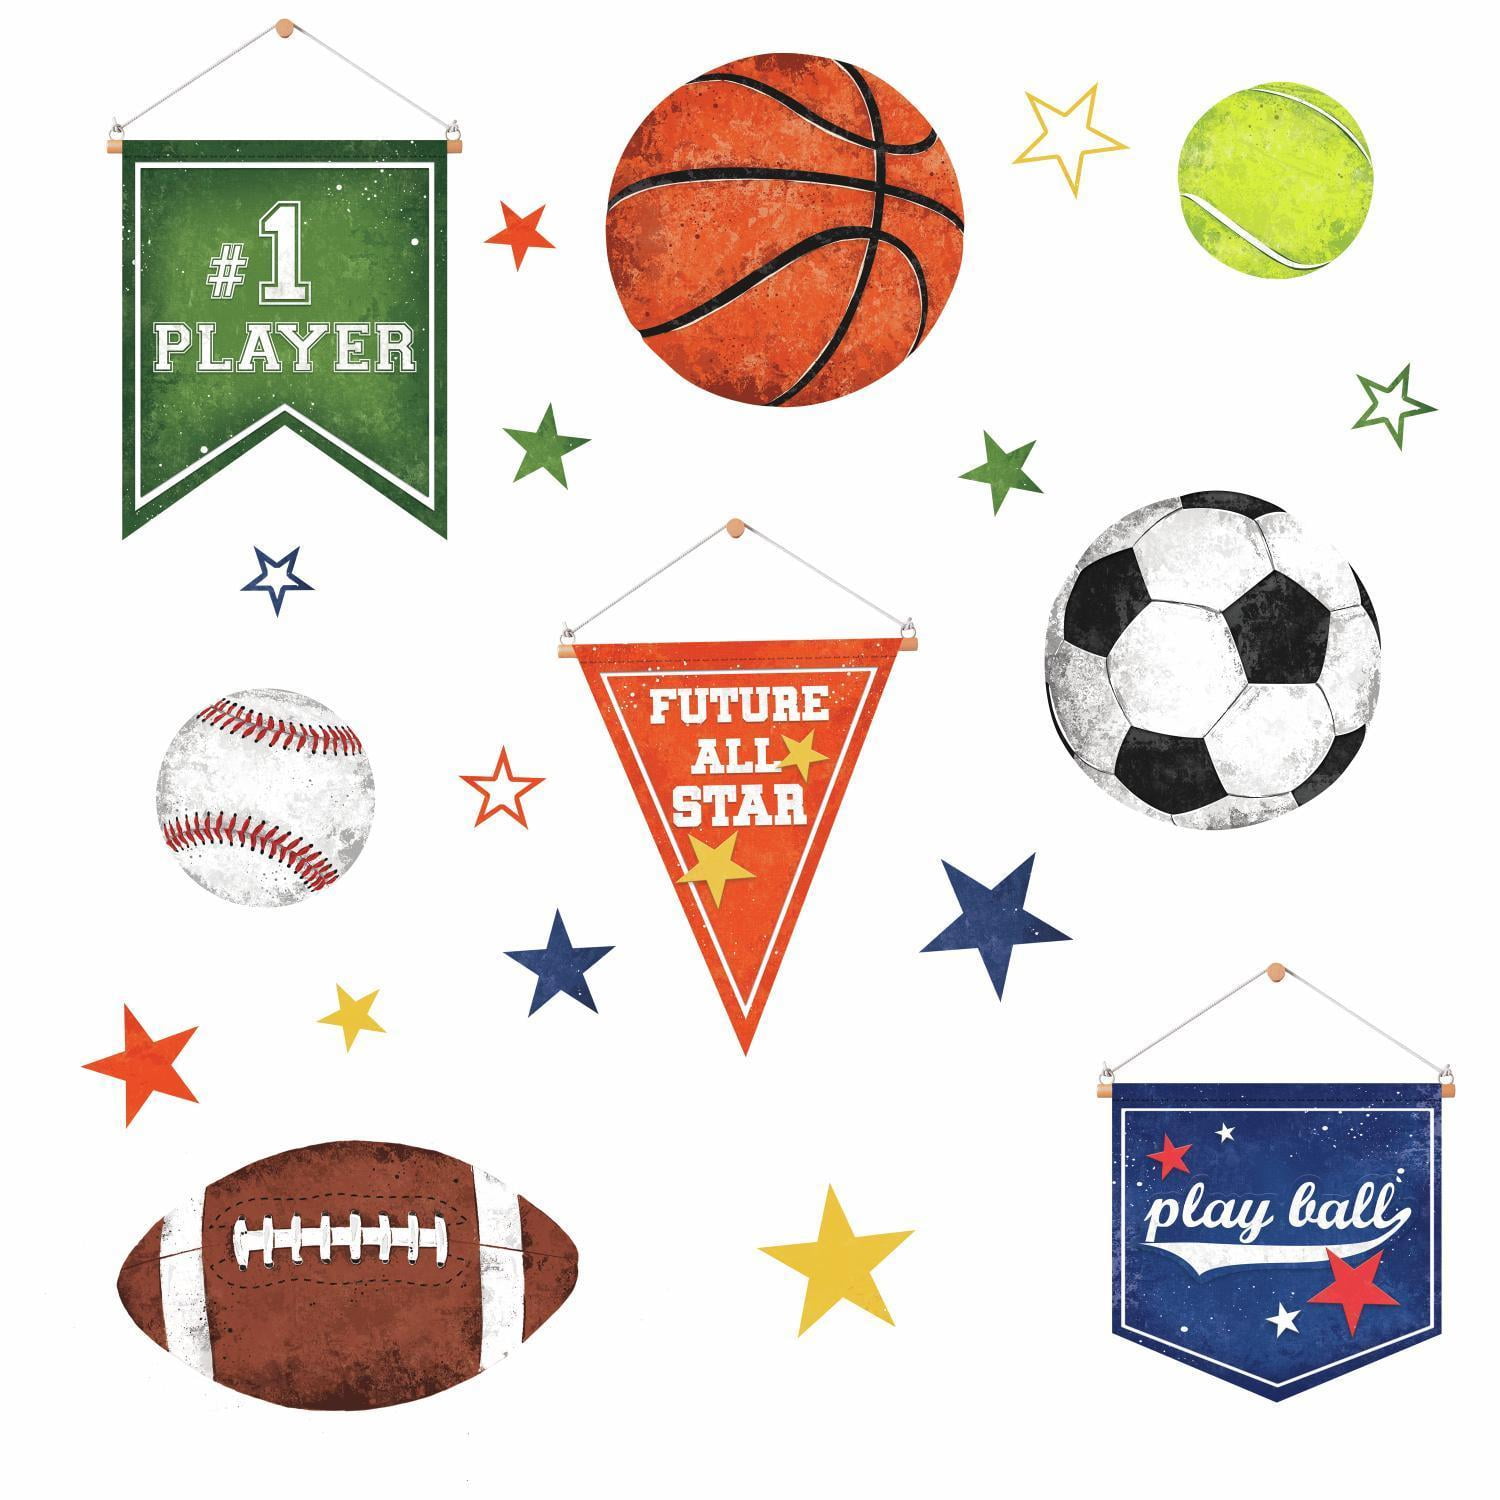 Details about   Vinyl Wall Decal Major League Lacrosse Game Ball Sport Decor Stickers g550 